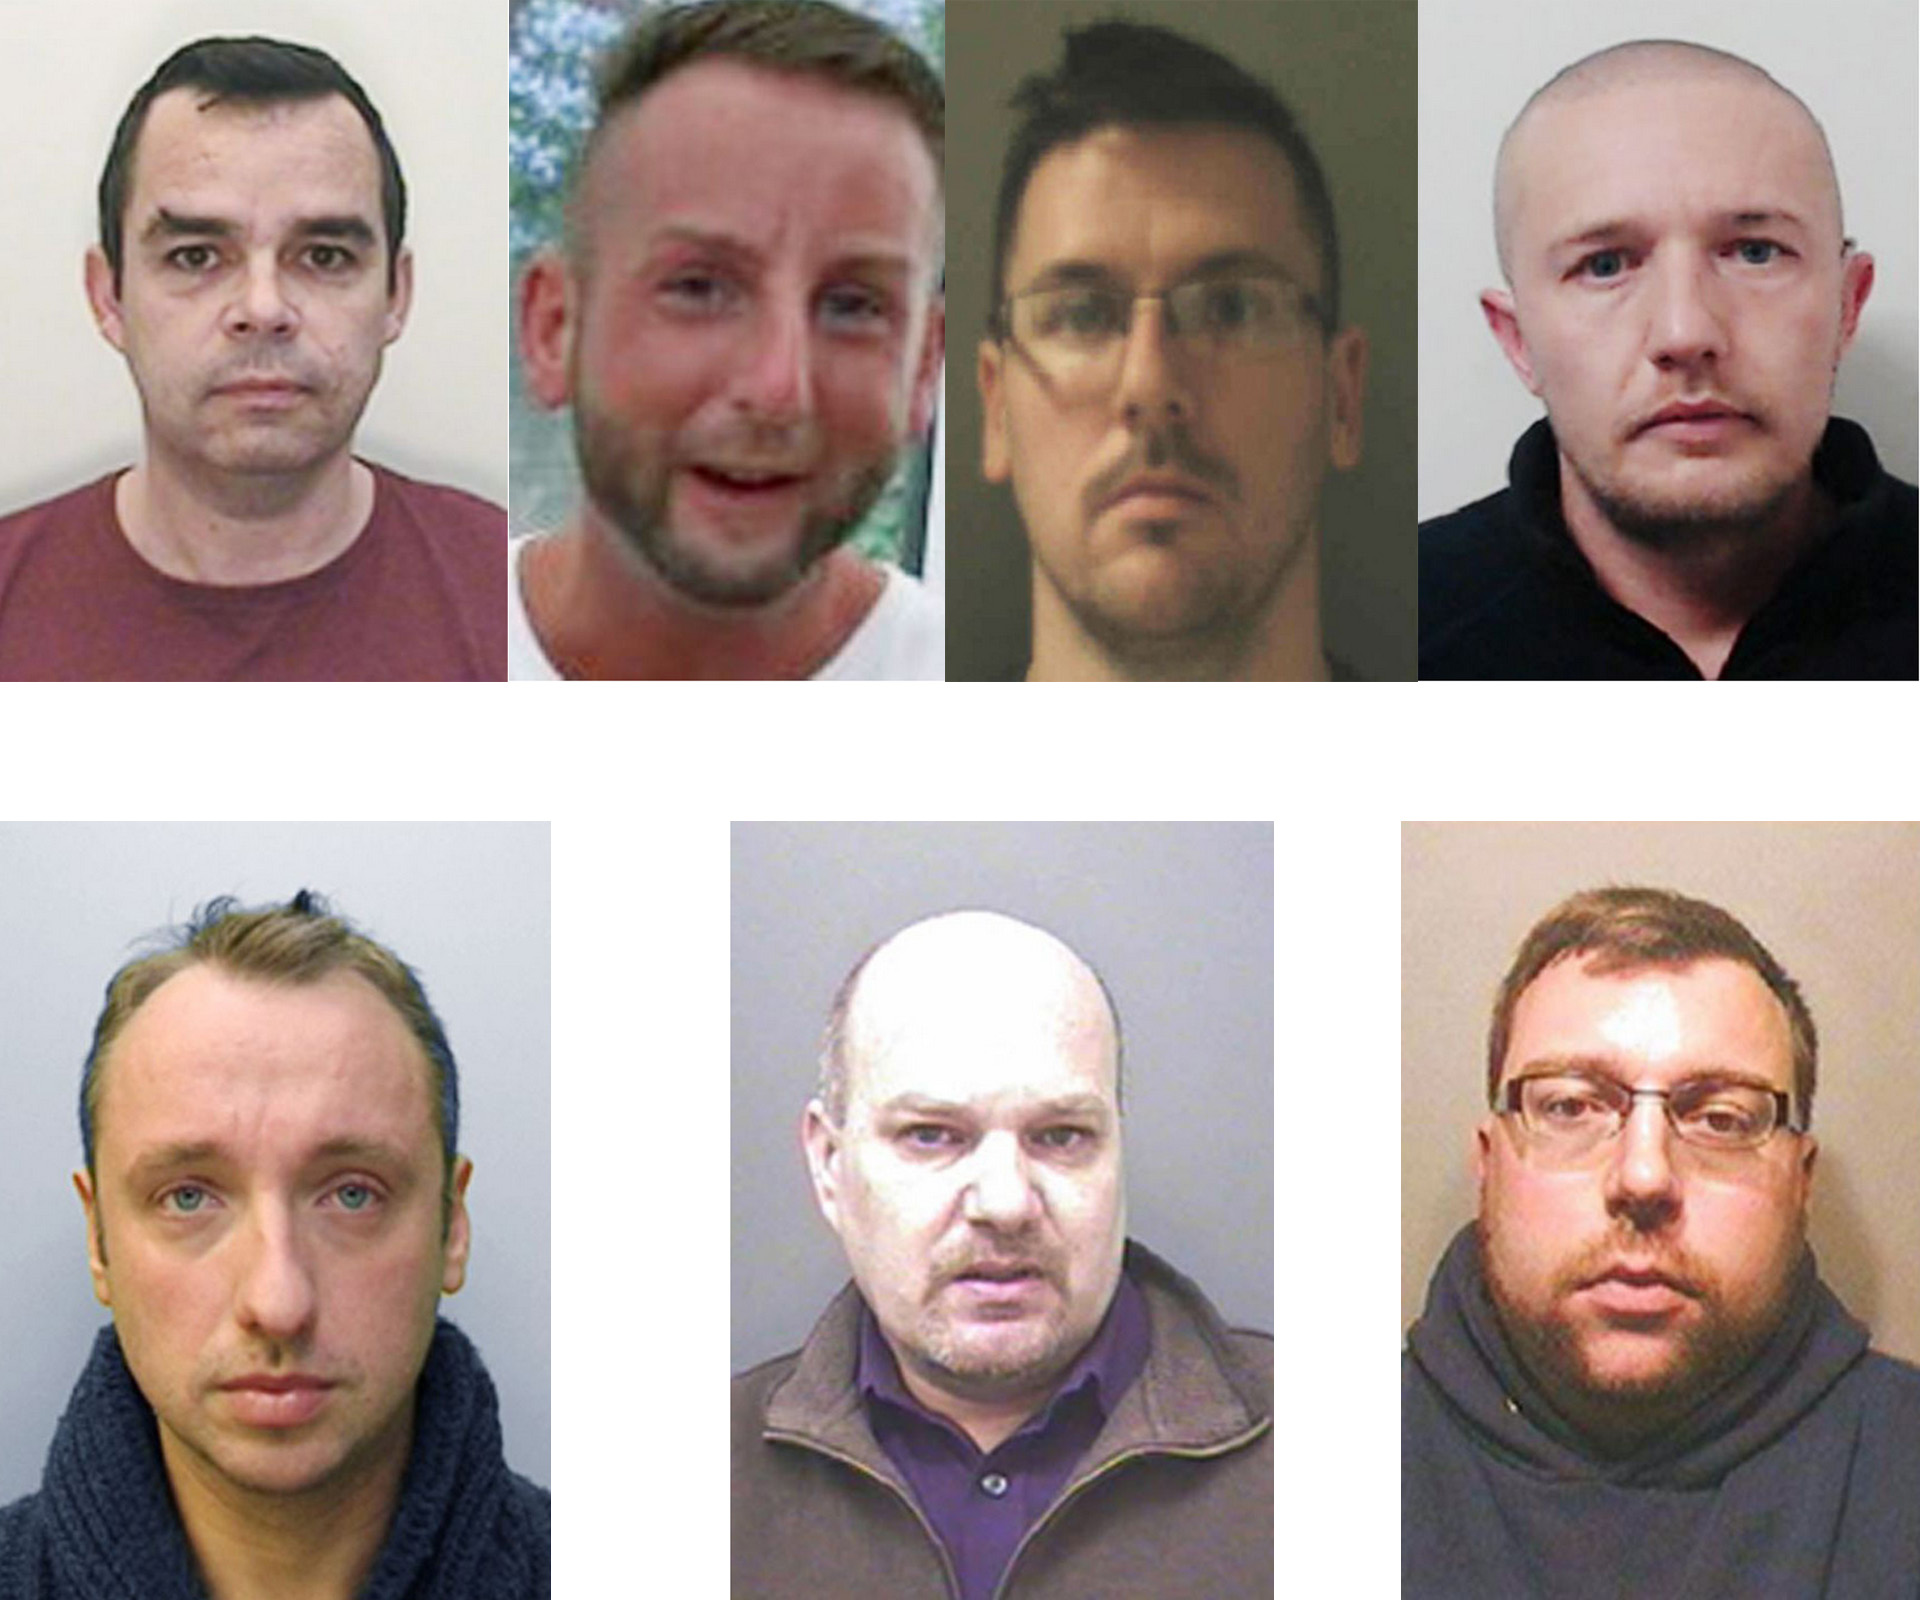 Police uncover sickening paedophile ring